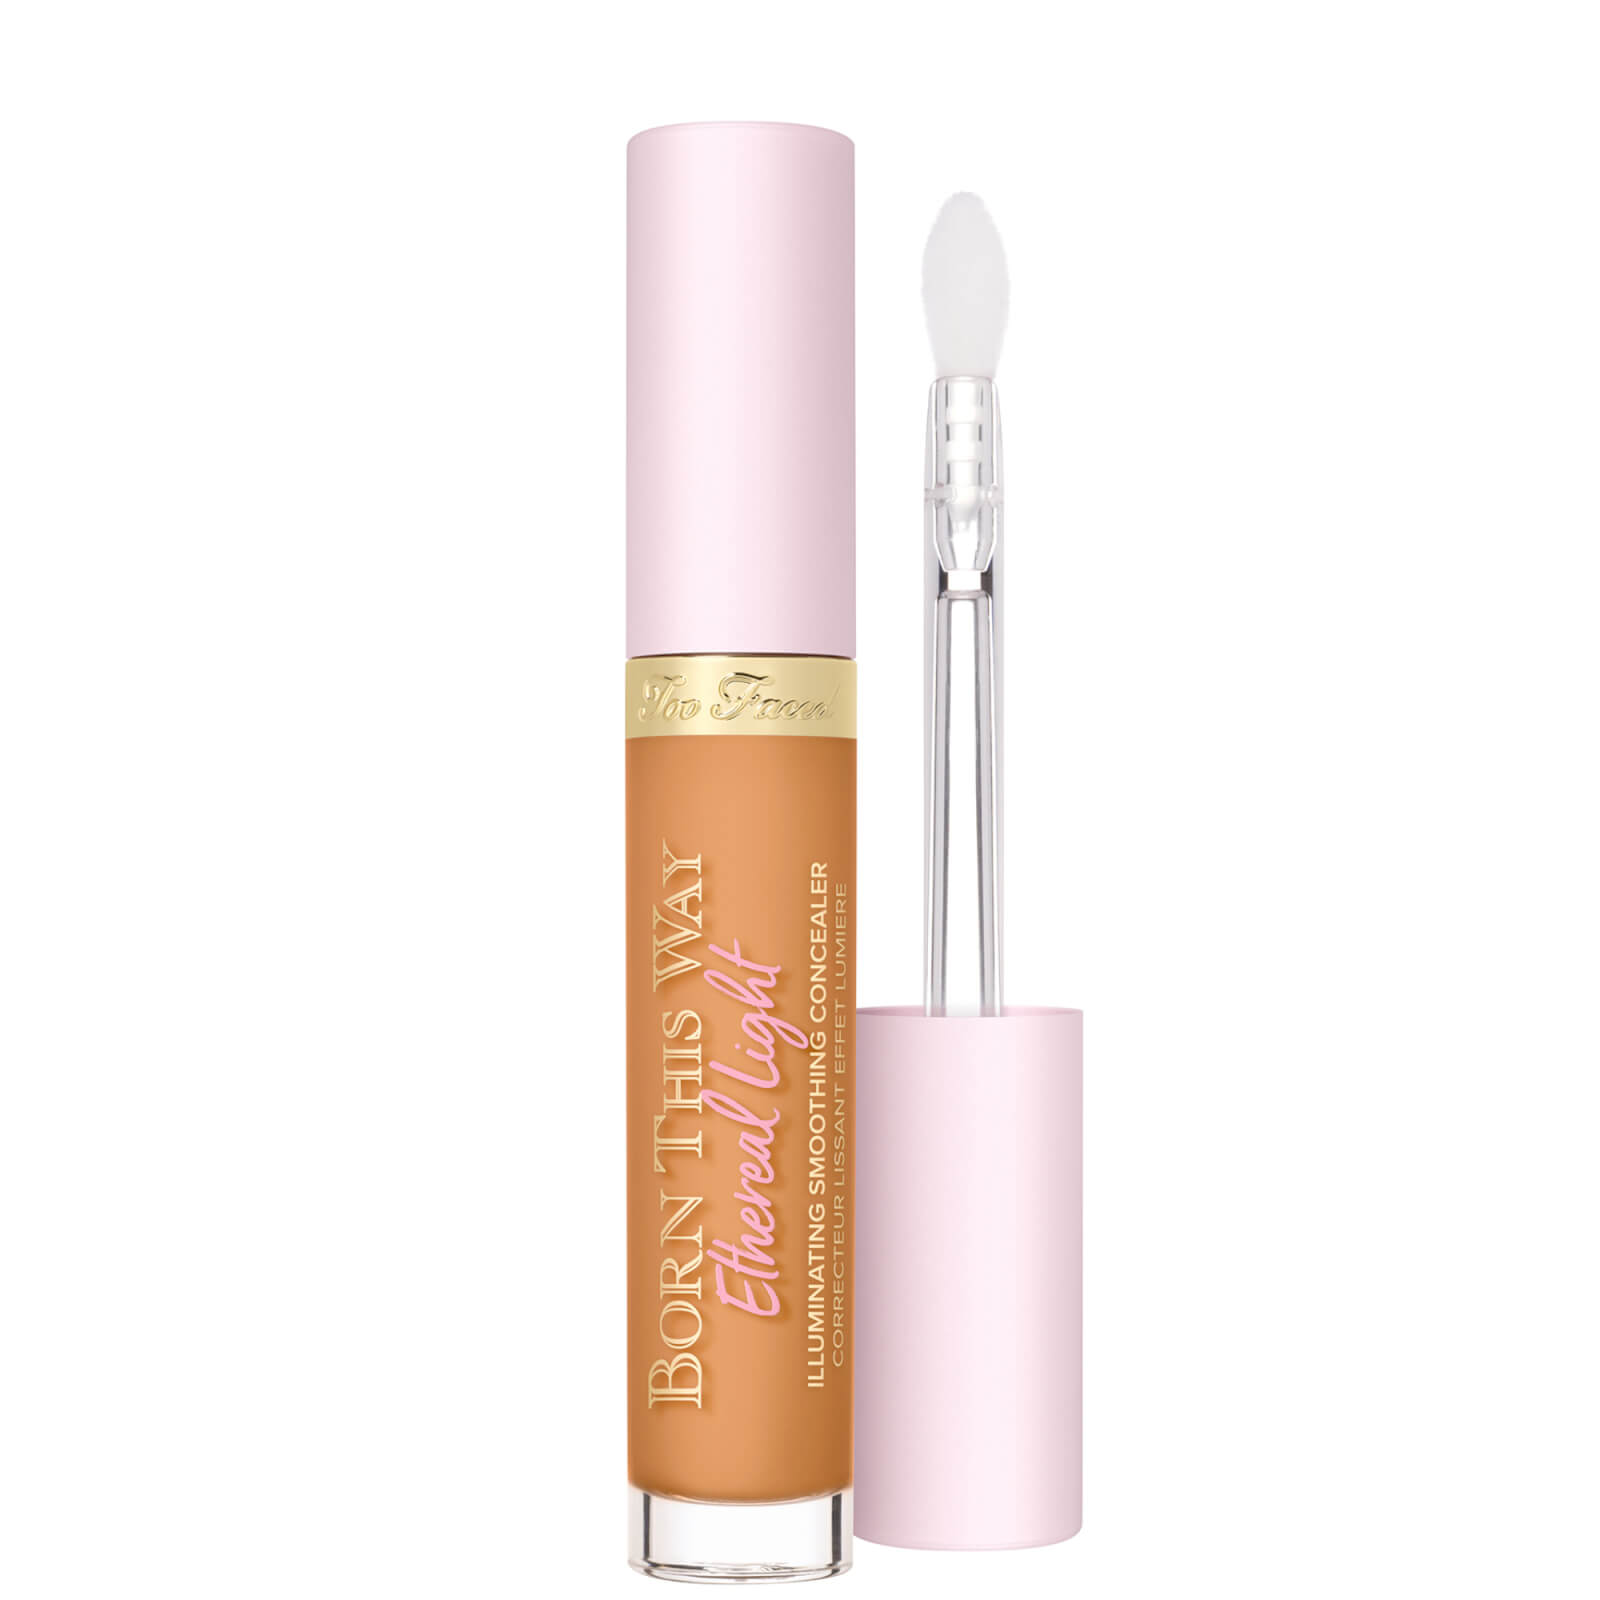 Too Faced Born This Way Ethereal Light Illuminating Smoothing Concealer 15ml (Various Shades) - Ging